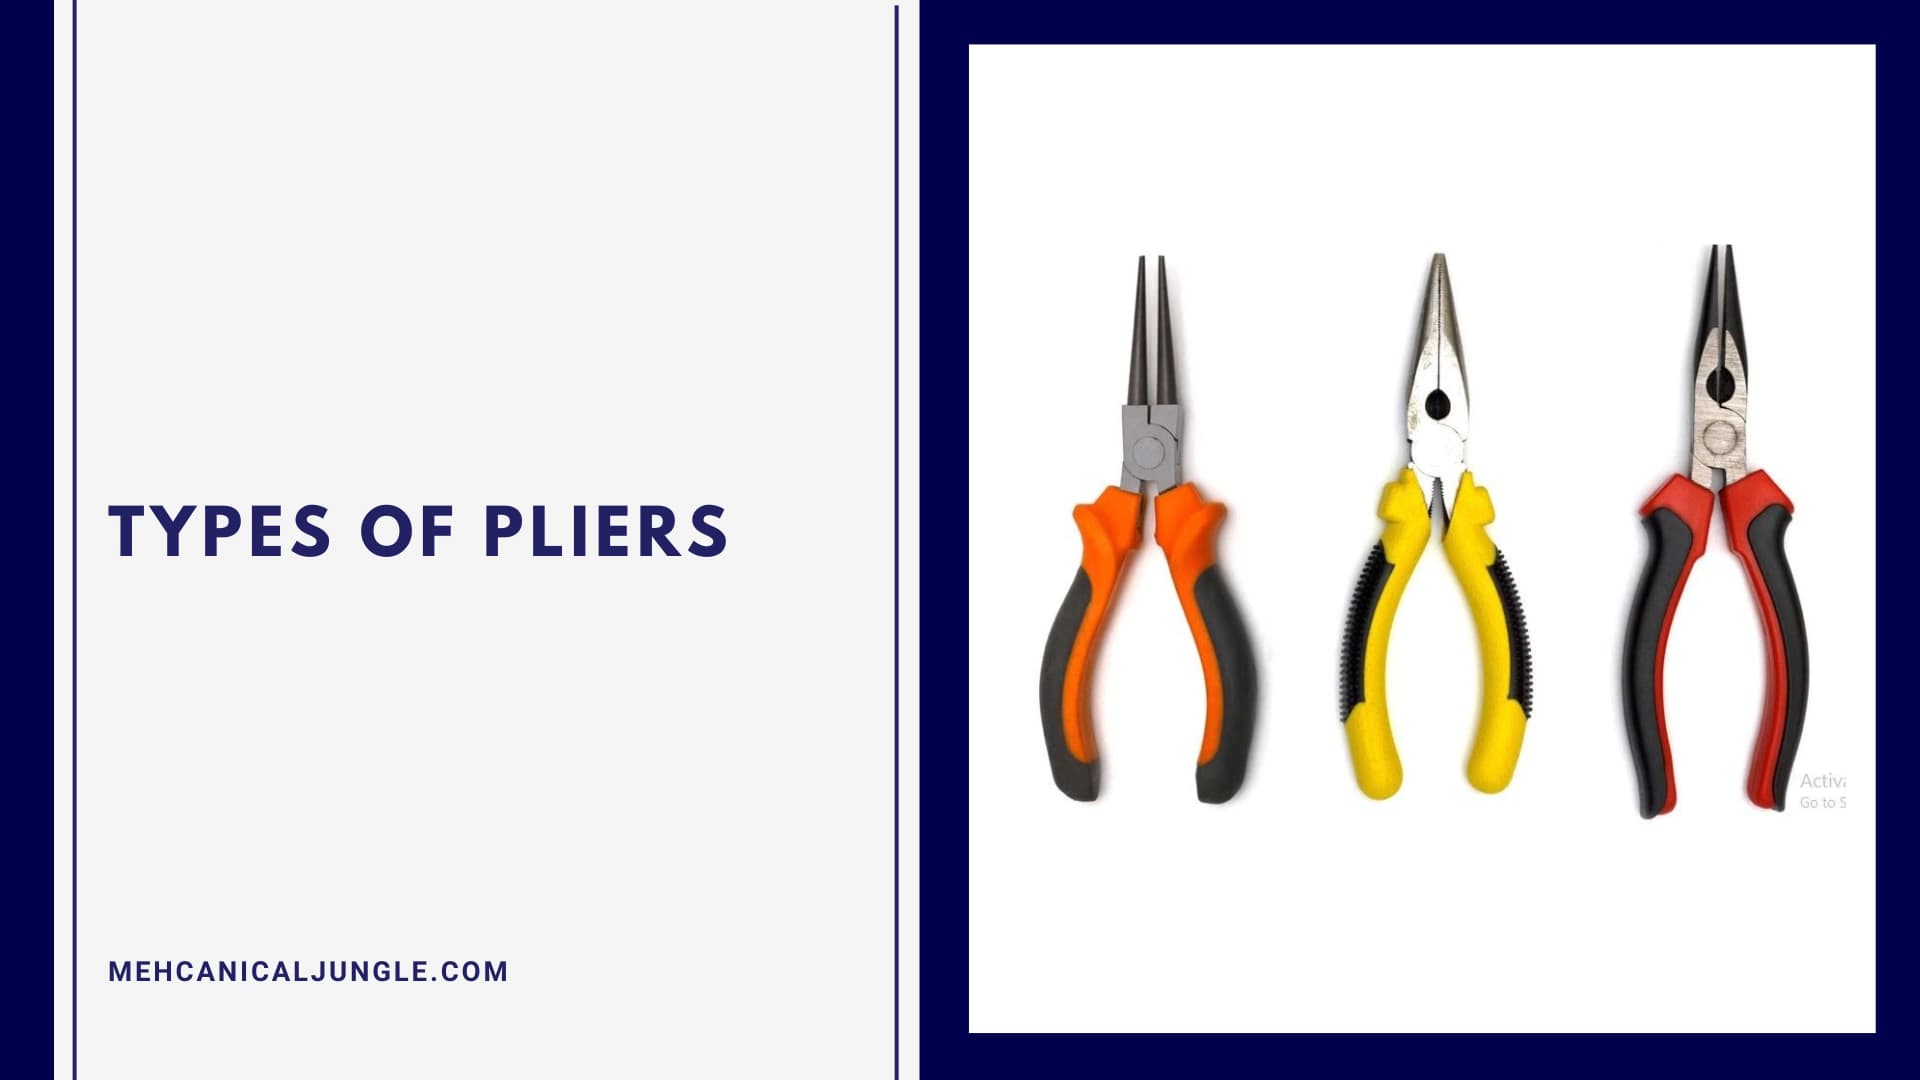 Types of Pliers